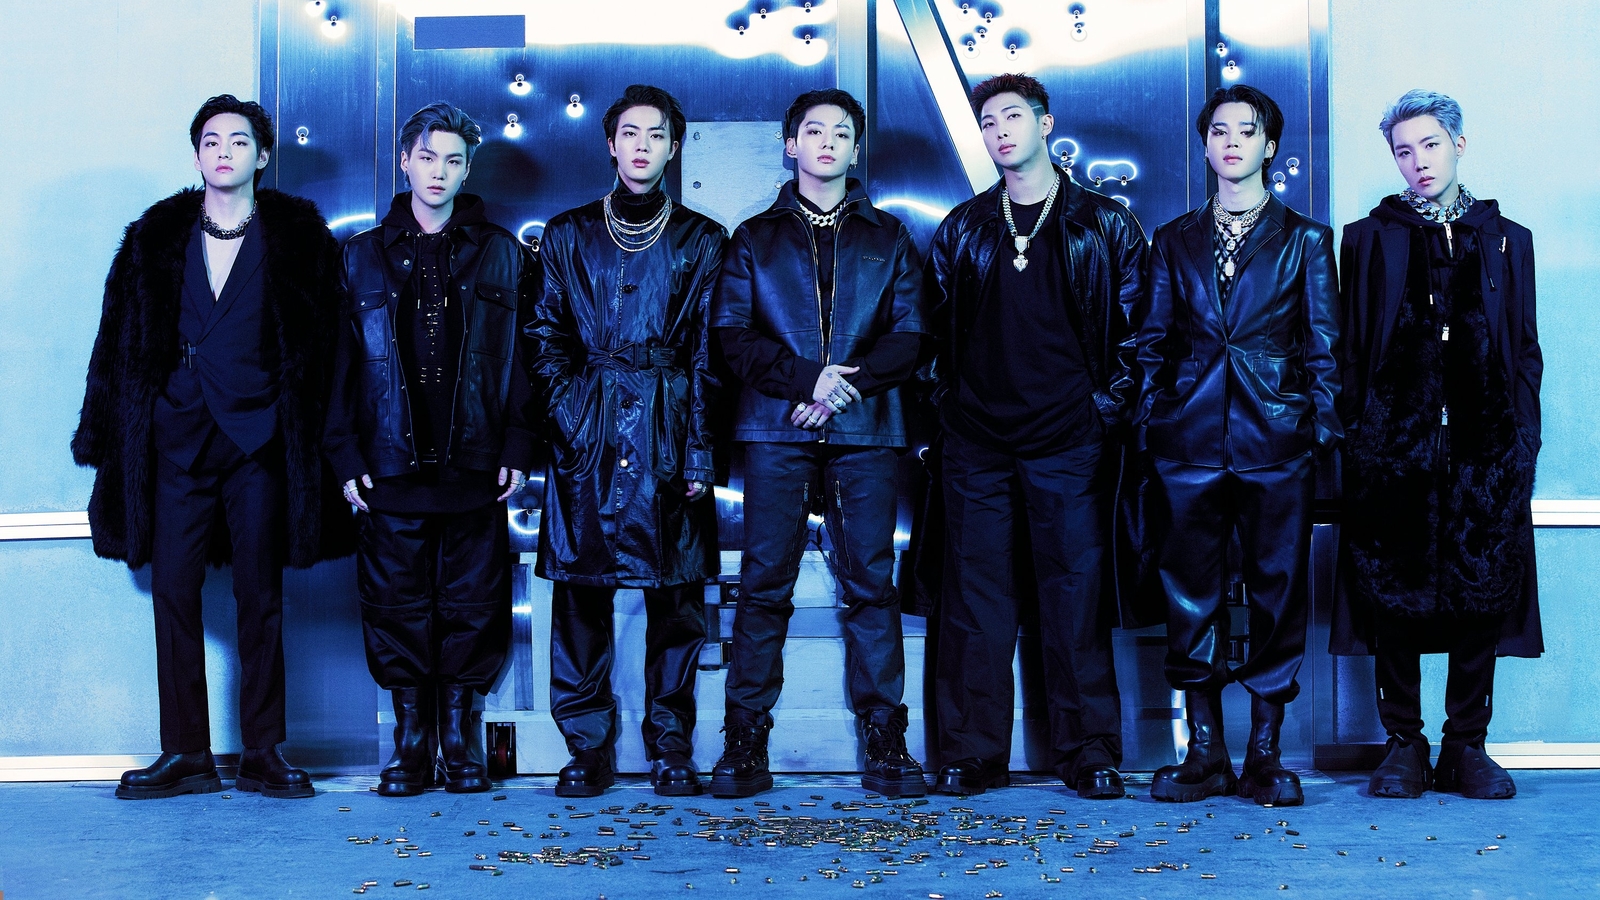 BTS Proof Concept Photo: Band Poses In Front Of Bullet Ridden Vault, Fans React